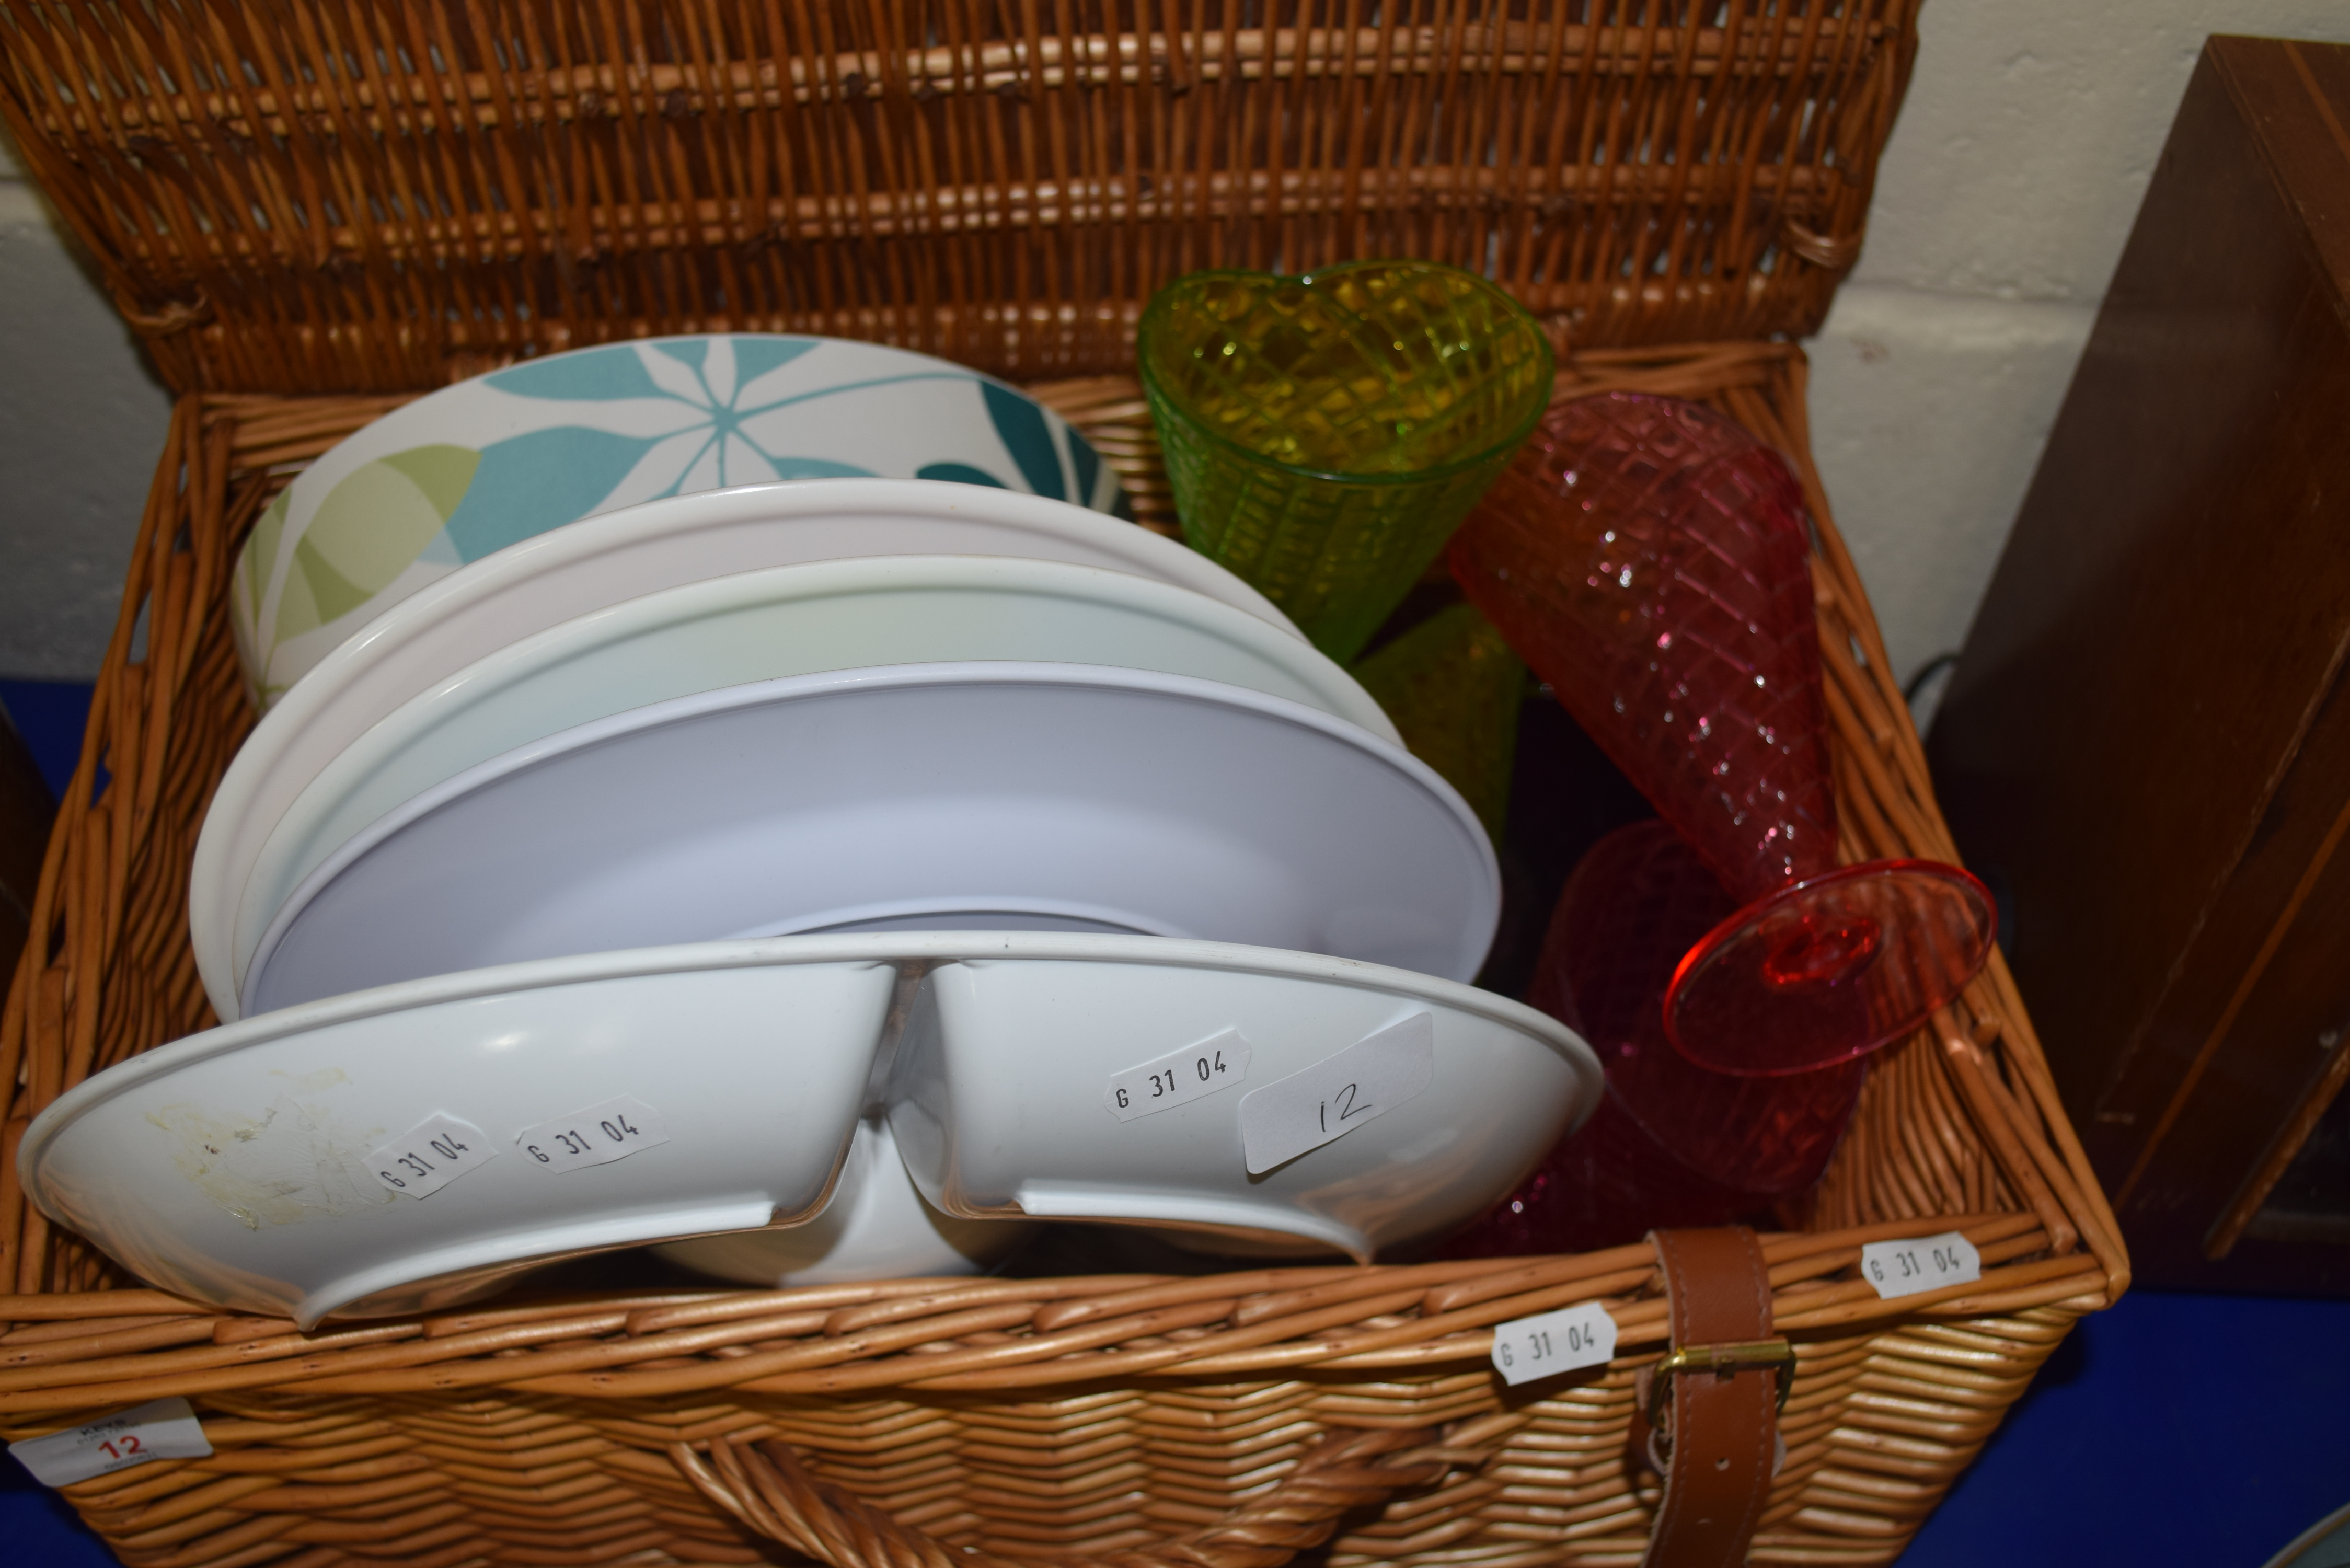 PICNIC HAMPER CONTAINING PLASTIC PLATES, HORS D'OEUVRES DISH, DRINKING VESSELS ETC